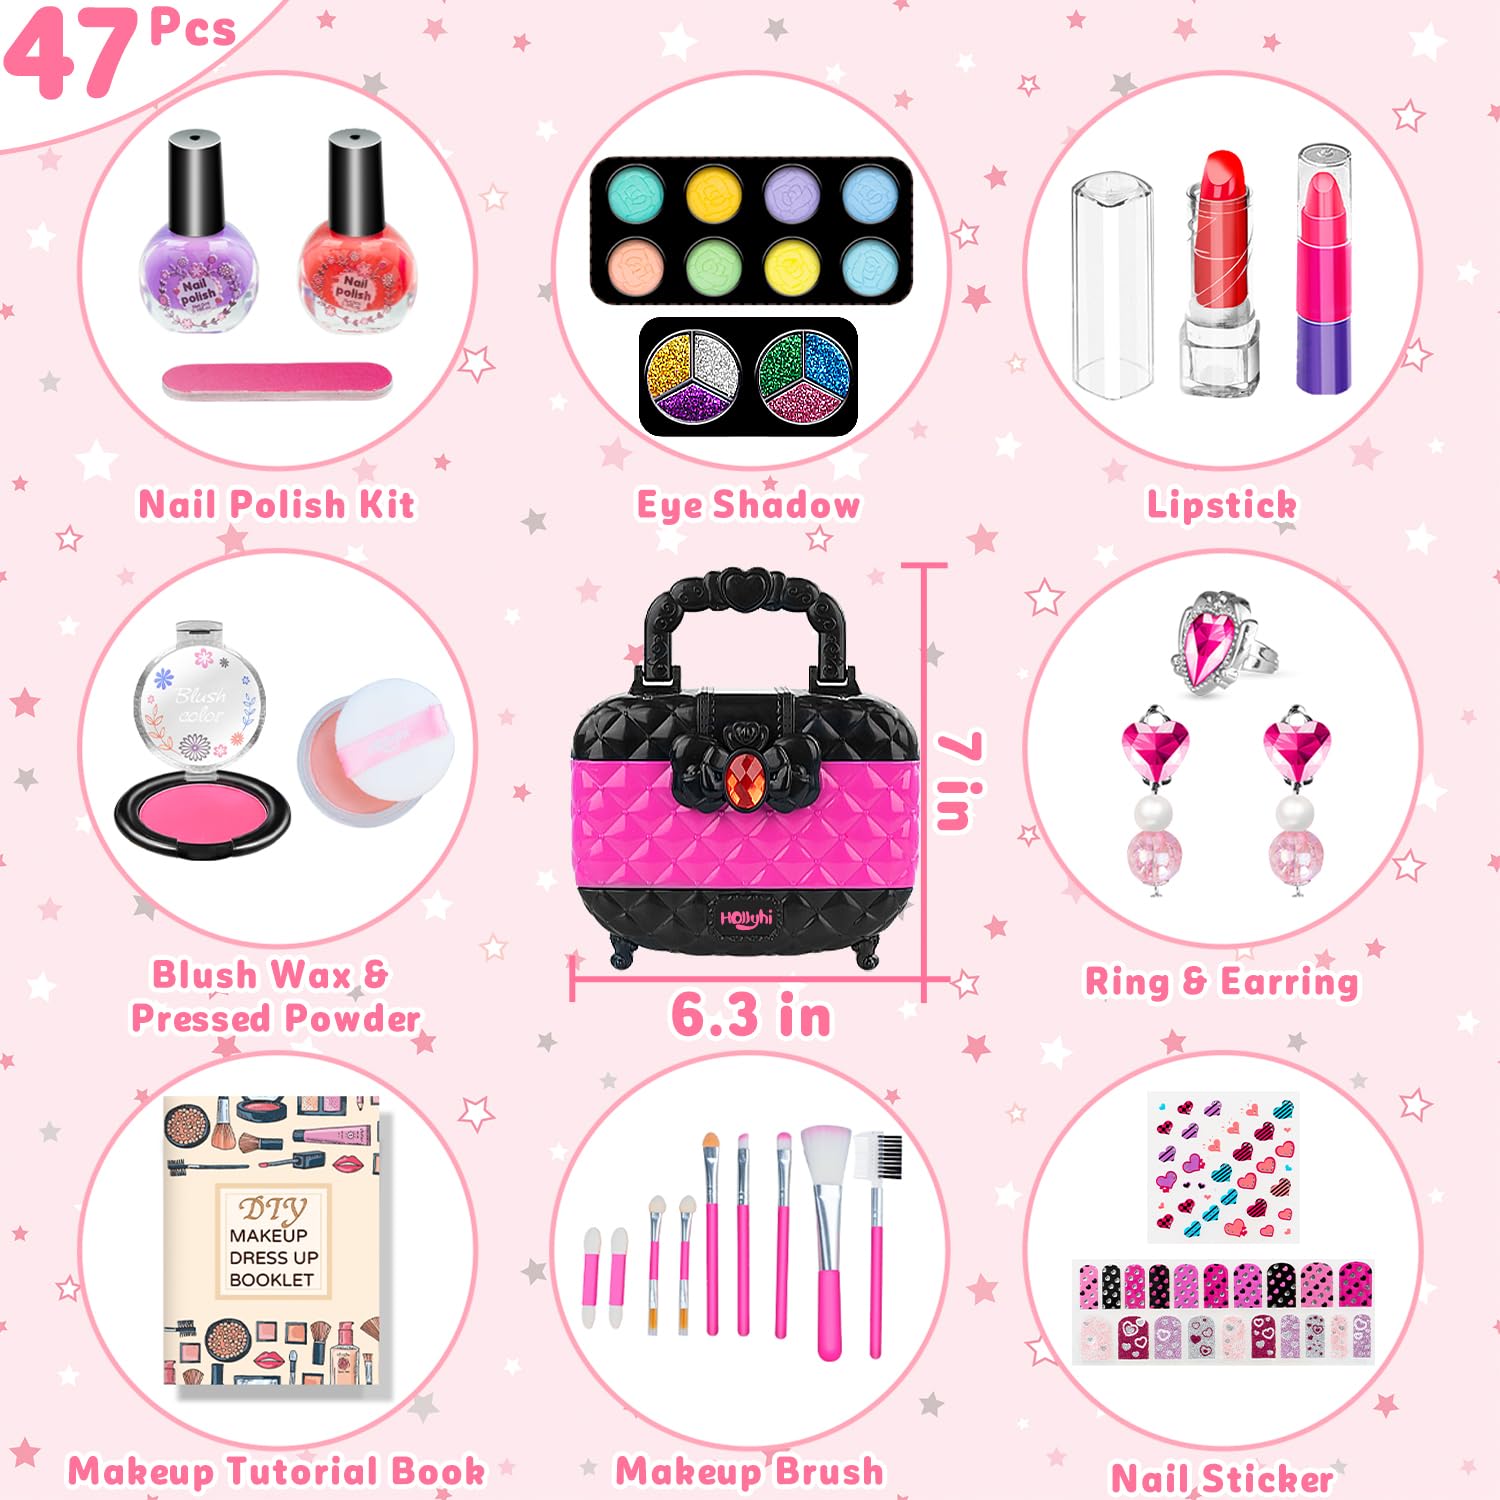 Hollyhi 47 Pcs Kids Makeup Kit for Girl, Washable Makeup Set Toy with Real Cosmetic Case for Little Girls, Pretend Play Makeup Beauty Set Birthday Toys Gift for 3 4 5 6 7 8 9 10 11 12 Years Old Kid